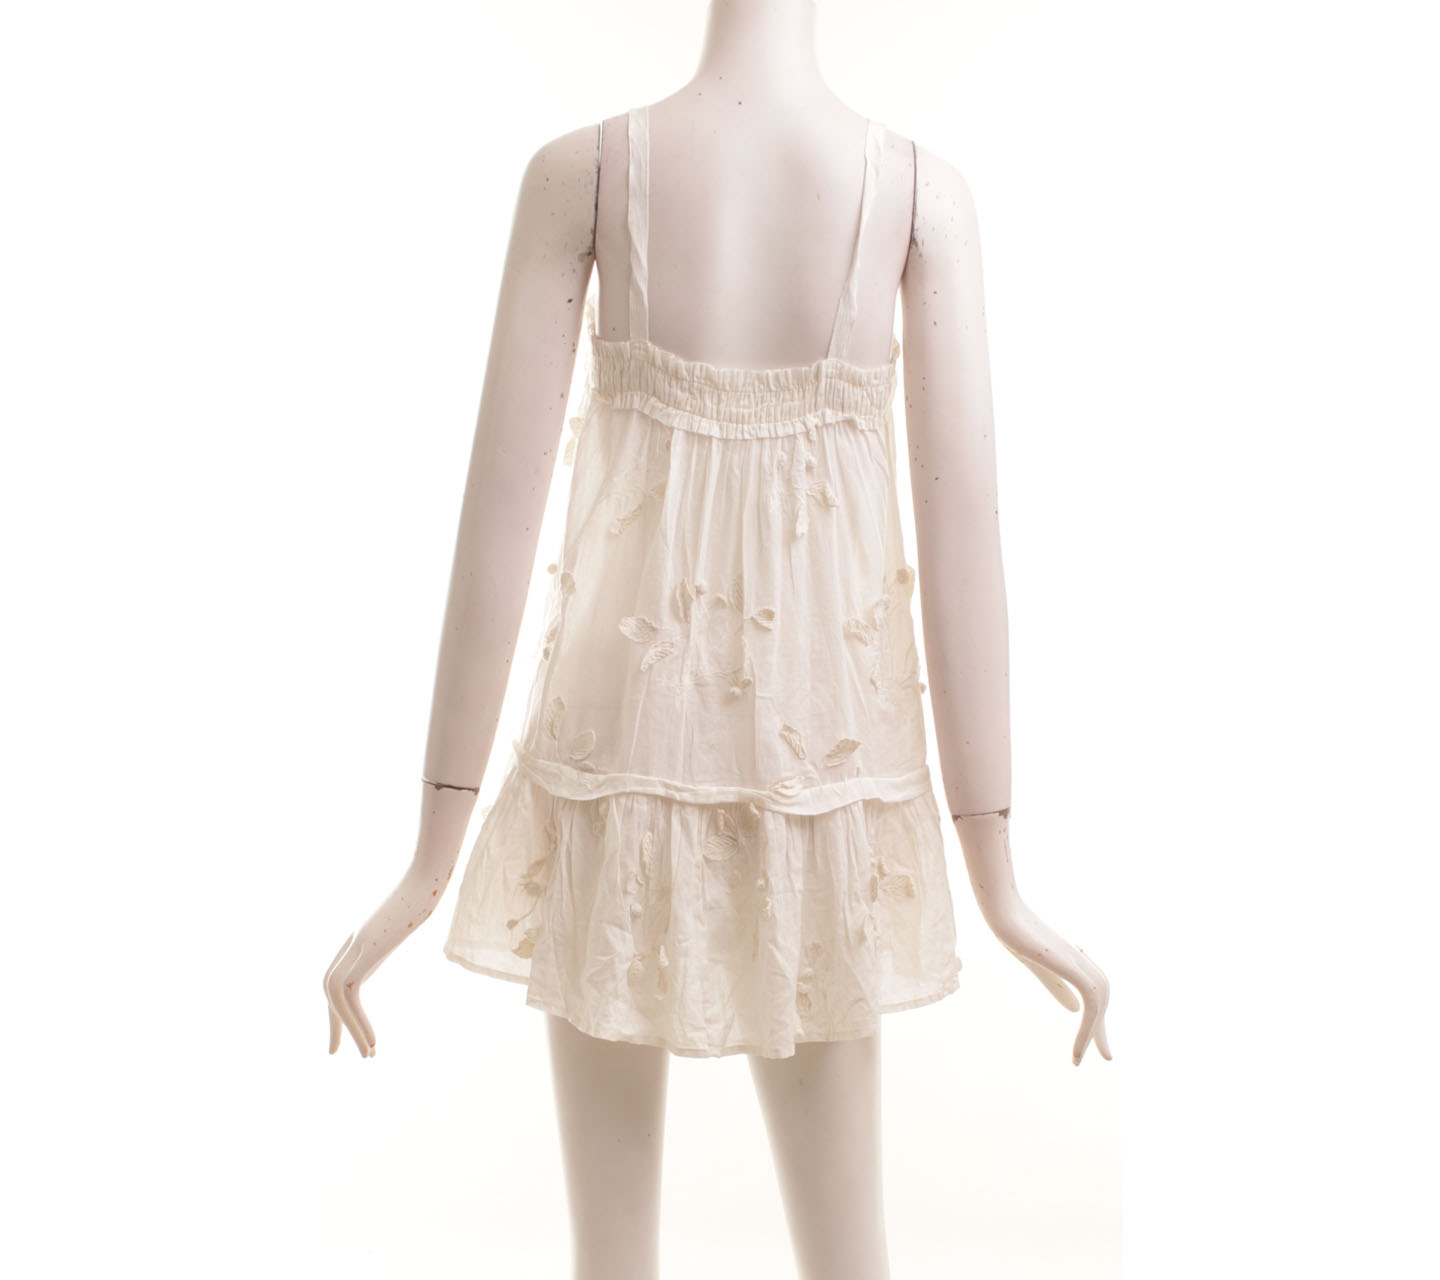 Moulinette Soeurs Patterned Lace Off White Sleeveless